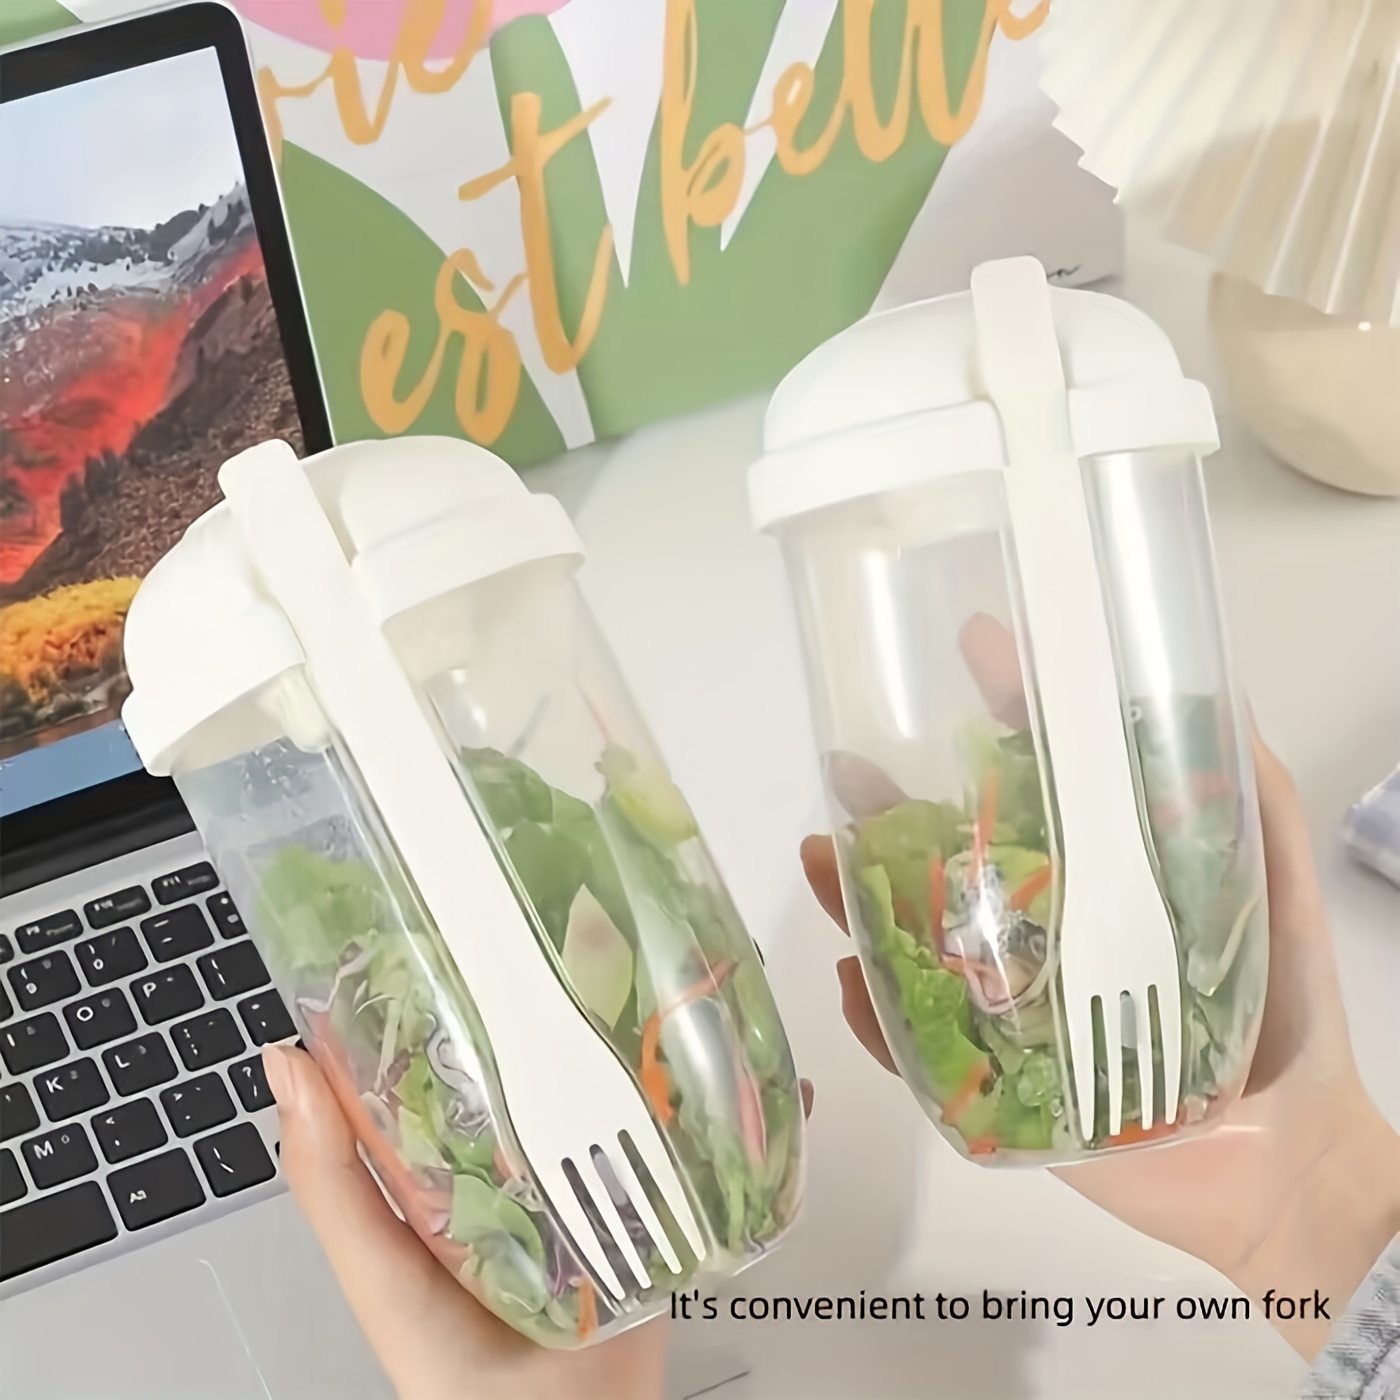 Fresh Salad Cup, Keep Fit Salad Meal Shaker Cup,, Portable Fruit